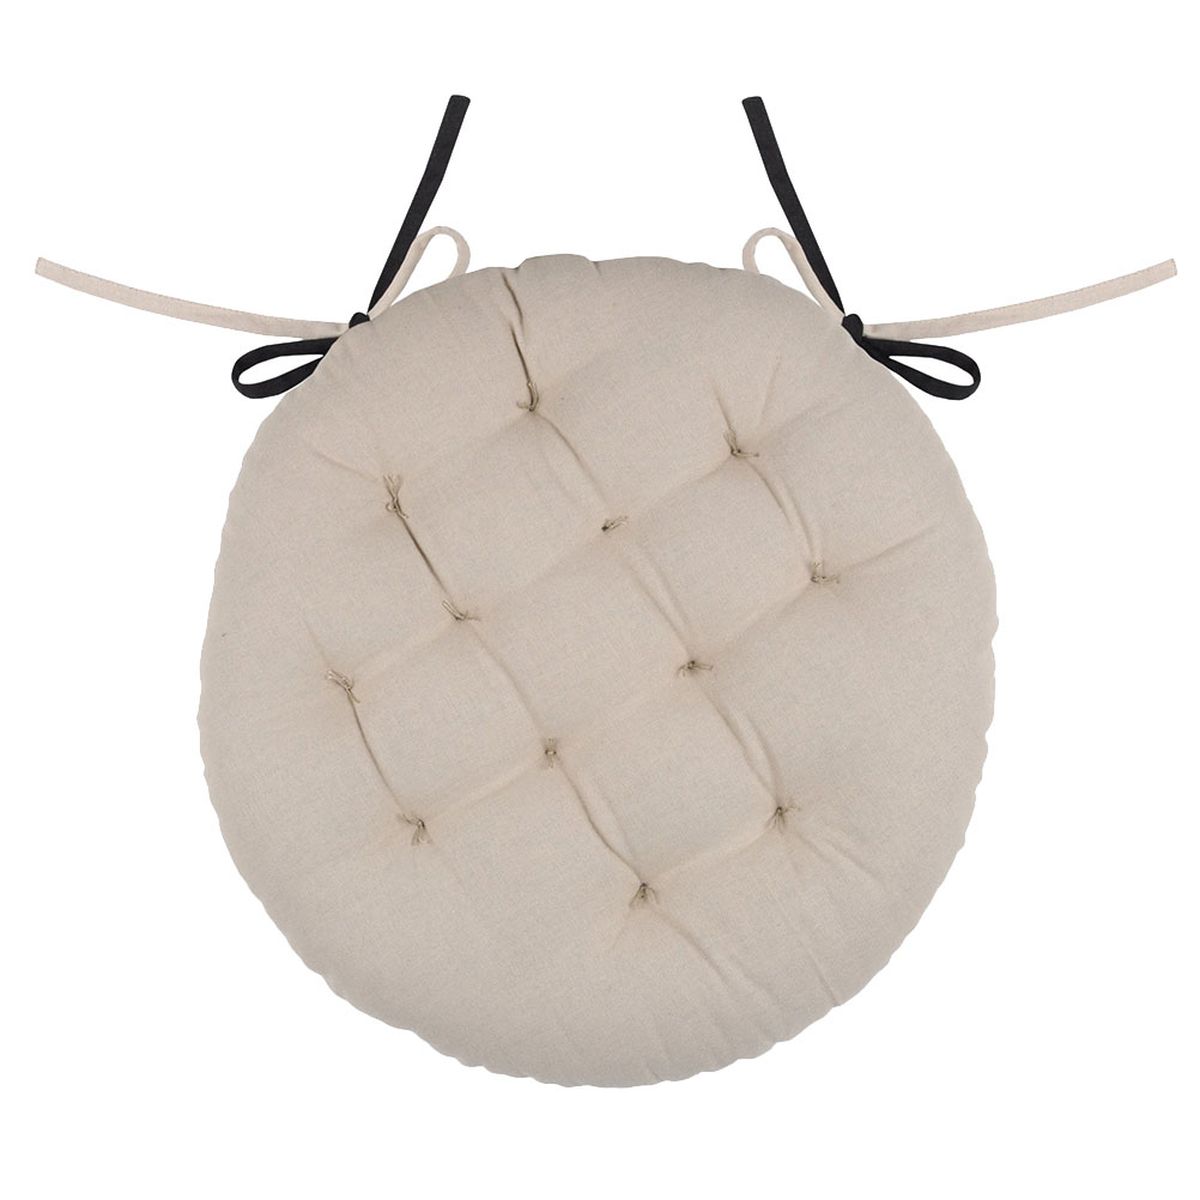 Round chair cushion reversible 38 cm - Black and Linen